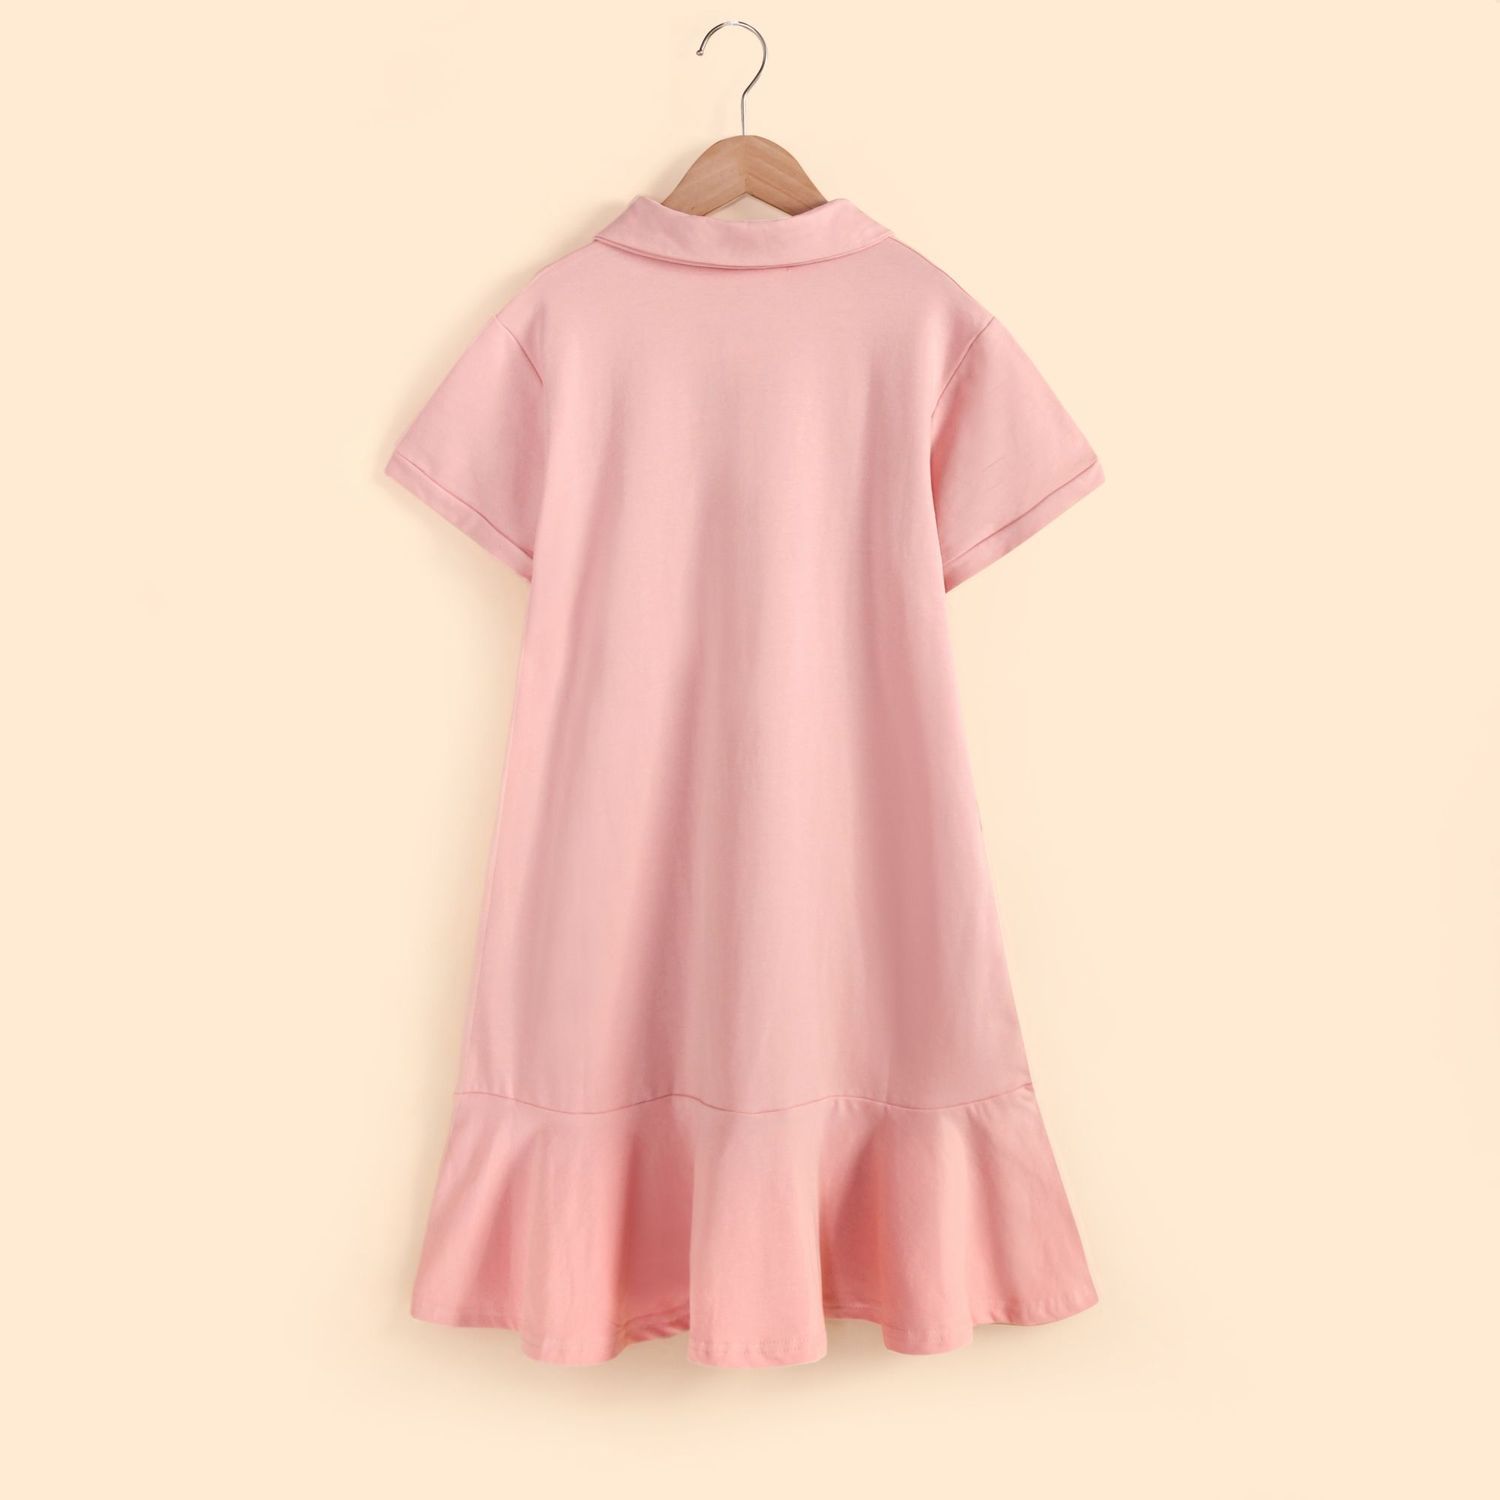 Girls polo skirt summer new children's polo dress drape foreign style middle and big children's student clothing